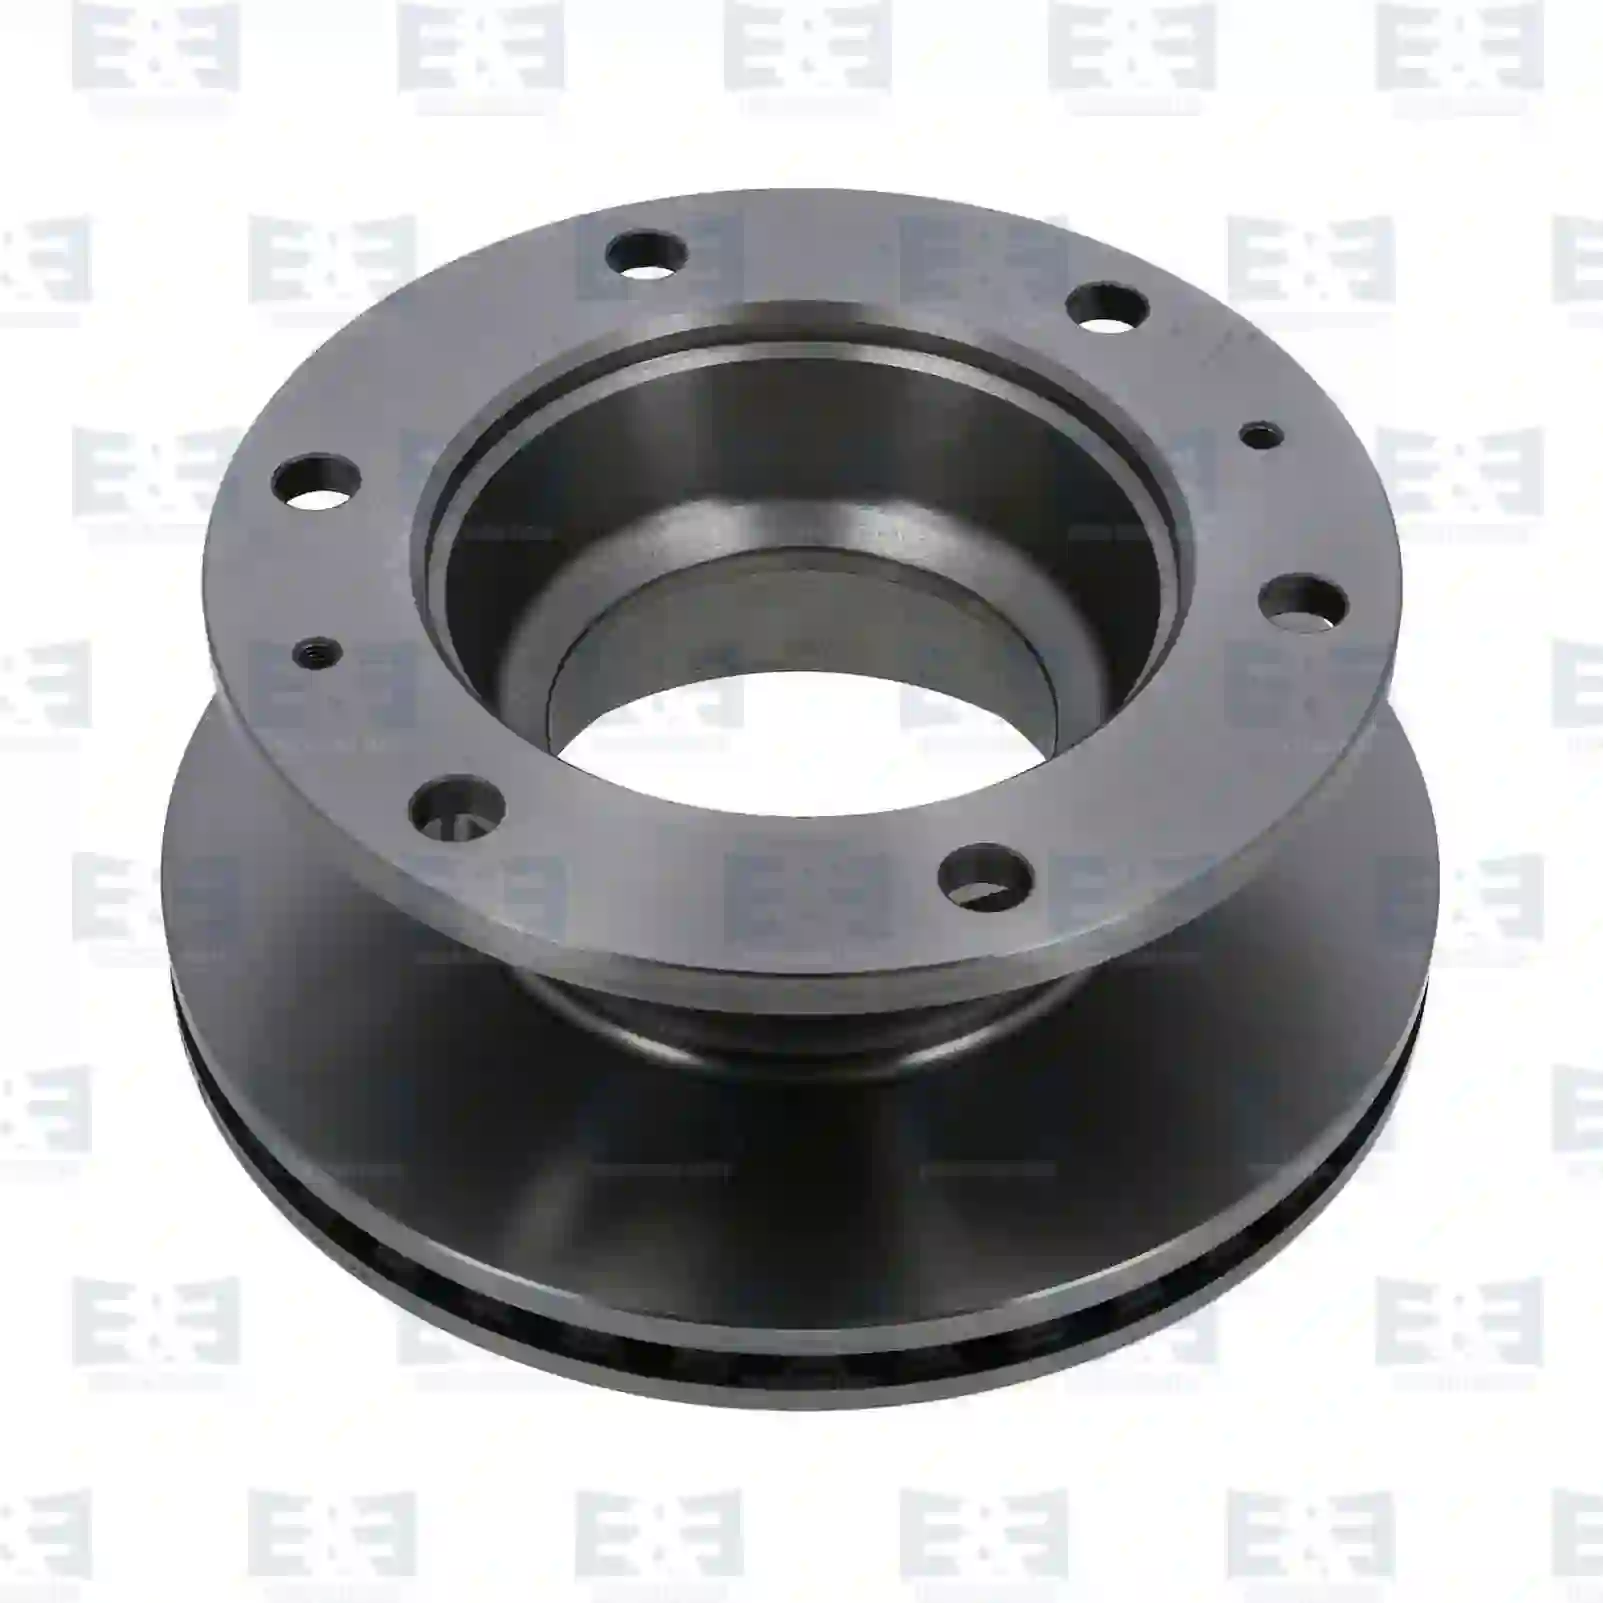  Brake disc, without ABS ring || E&E Truck Spare Parts | Truck Spare Parts, Auotomotive Spare Parts